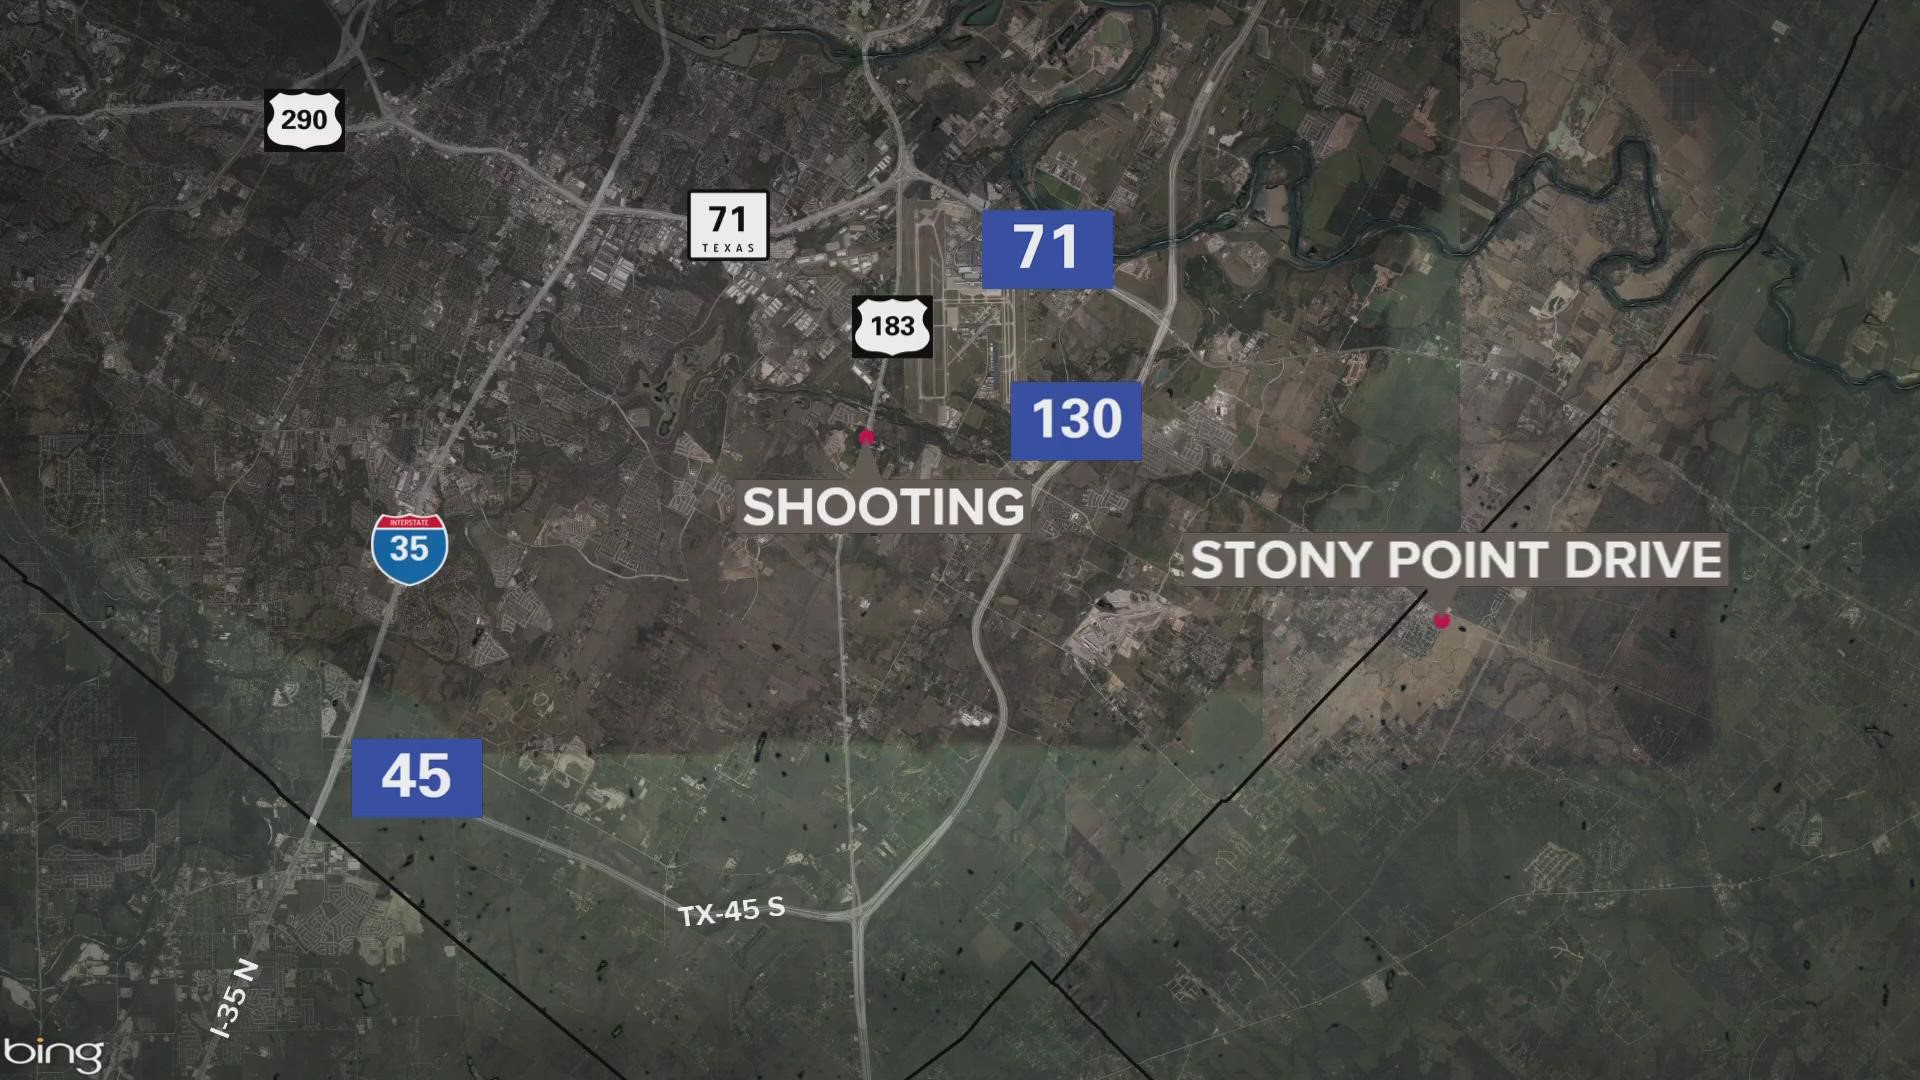 Investigators are hoping witnesses will come forward after a deadly shooting over the weekend.